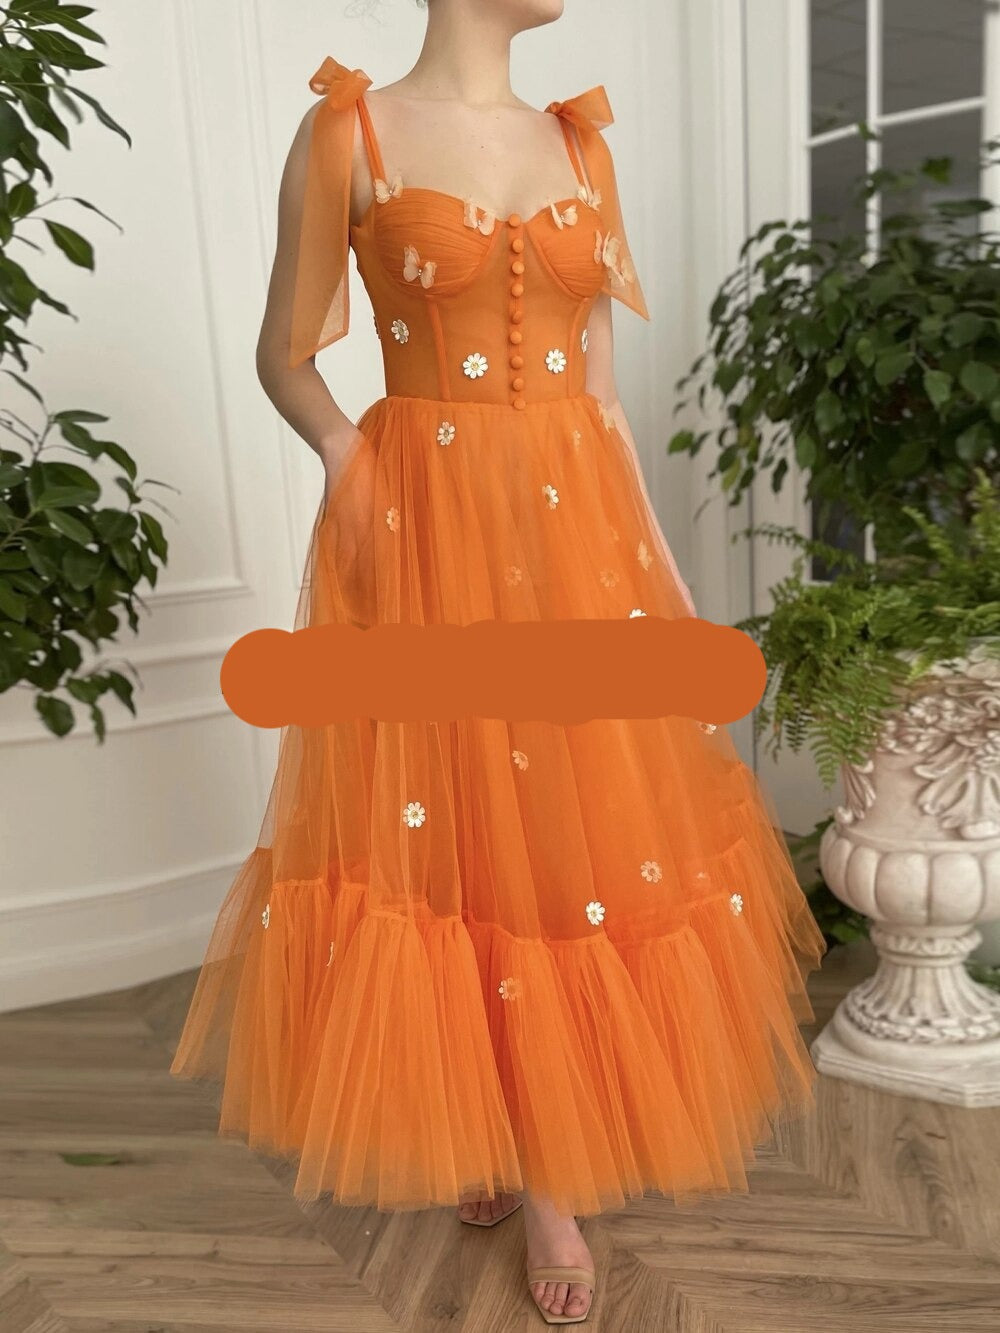 Fashion Orange Party Dresses Sweetheart Sleeveless Little Flowers Butterfly Tulle A Line Ankle Length Prom Dress